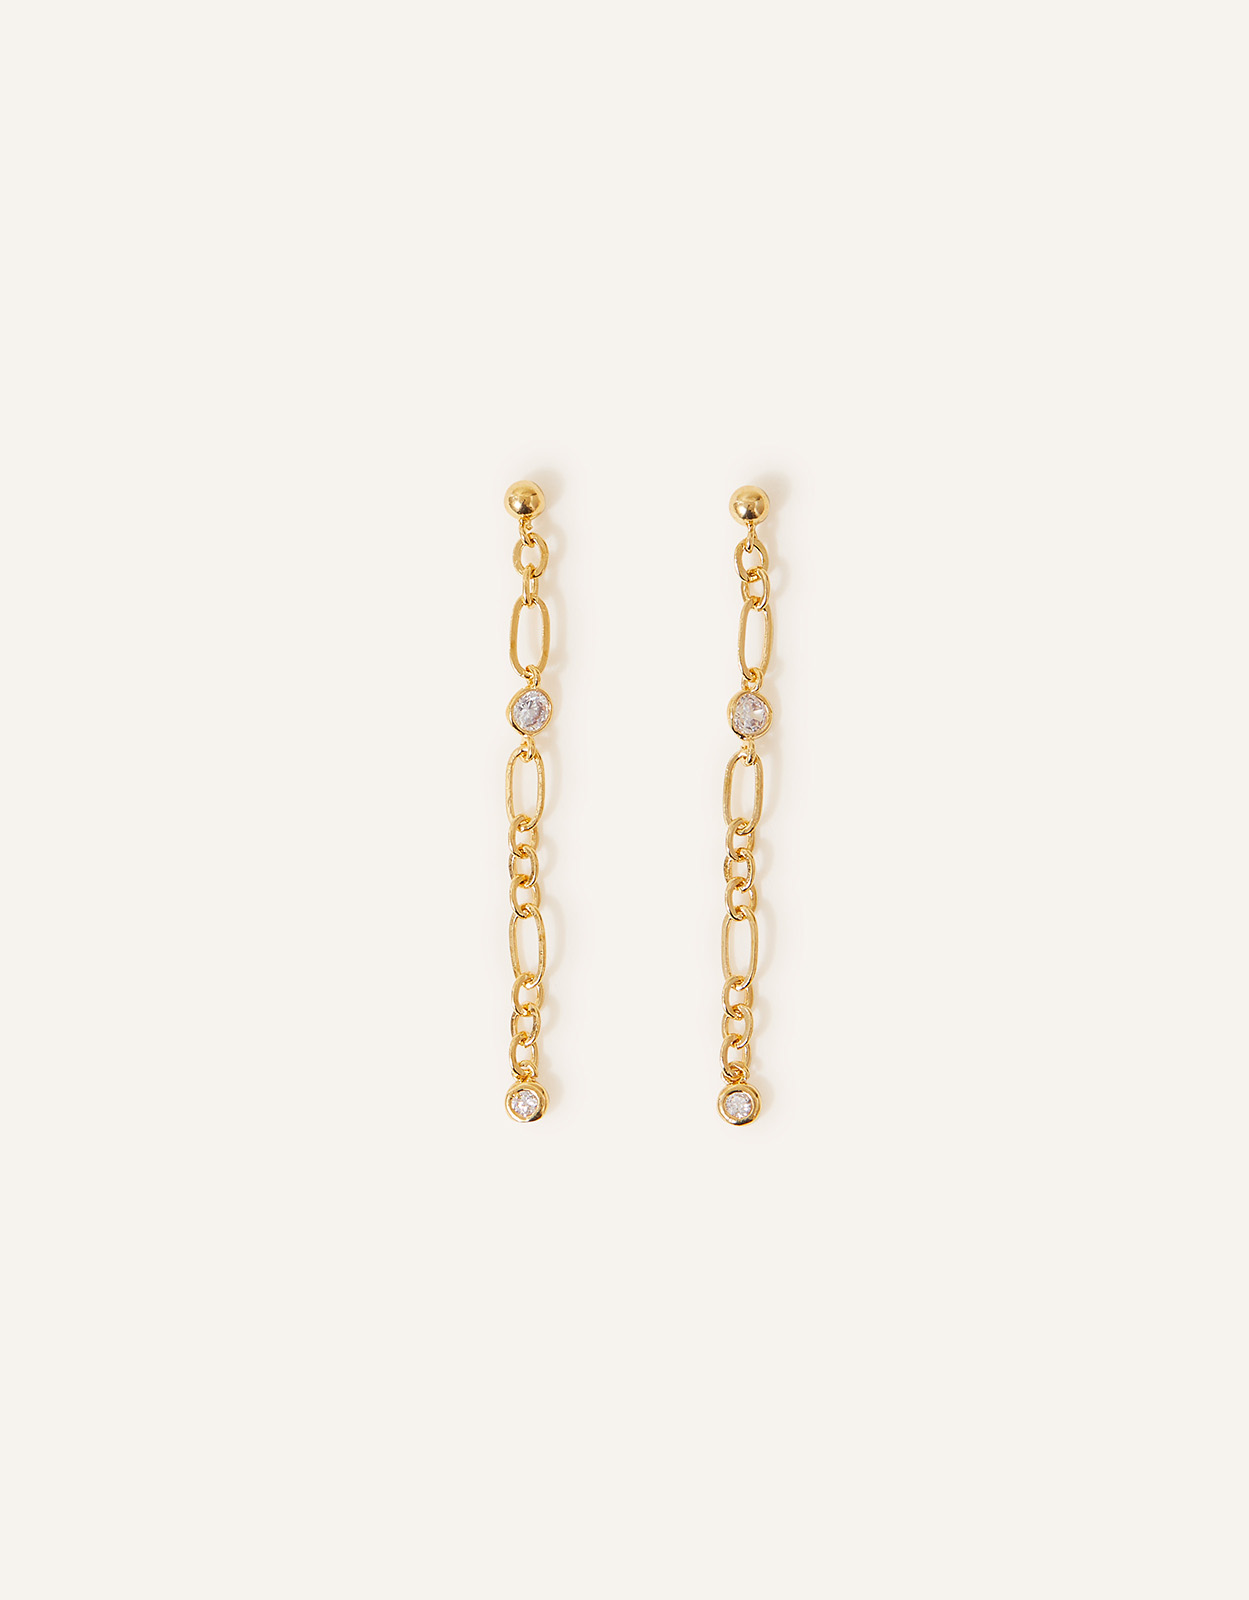 Accessorize Women's 14ct Gold-Plated Sparkle Long Chain Earrings